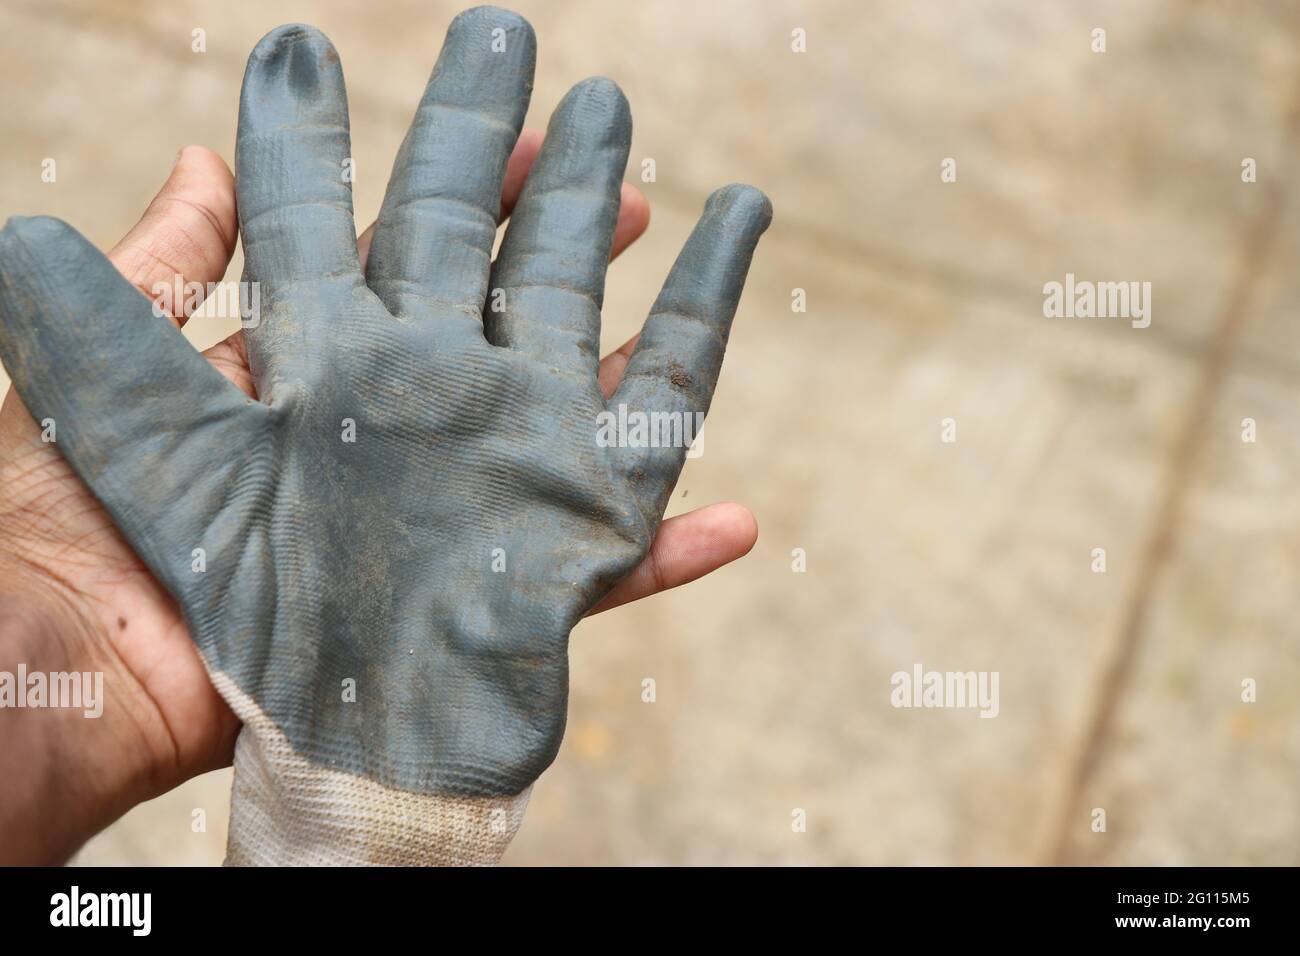 Working gloves held in hand after garden works with clean hands underneath. Protective gloves to safeguard hands on work process Stock Photo